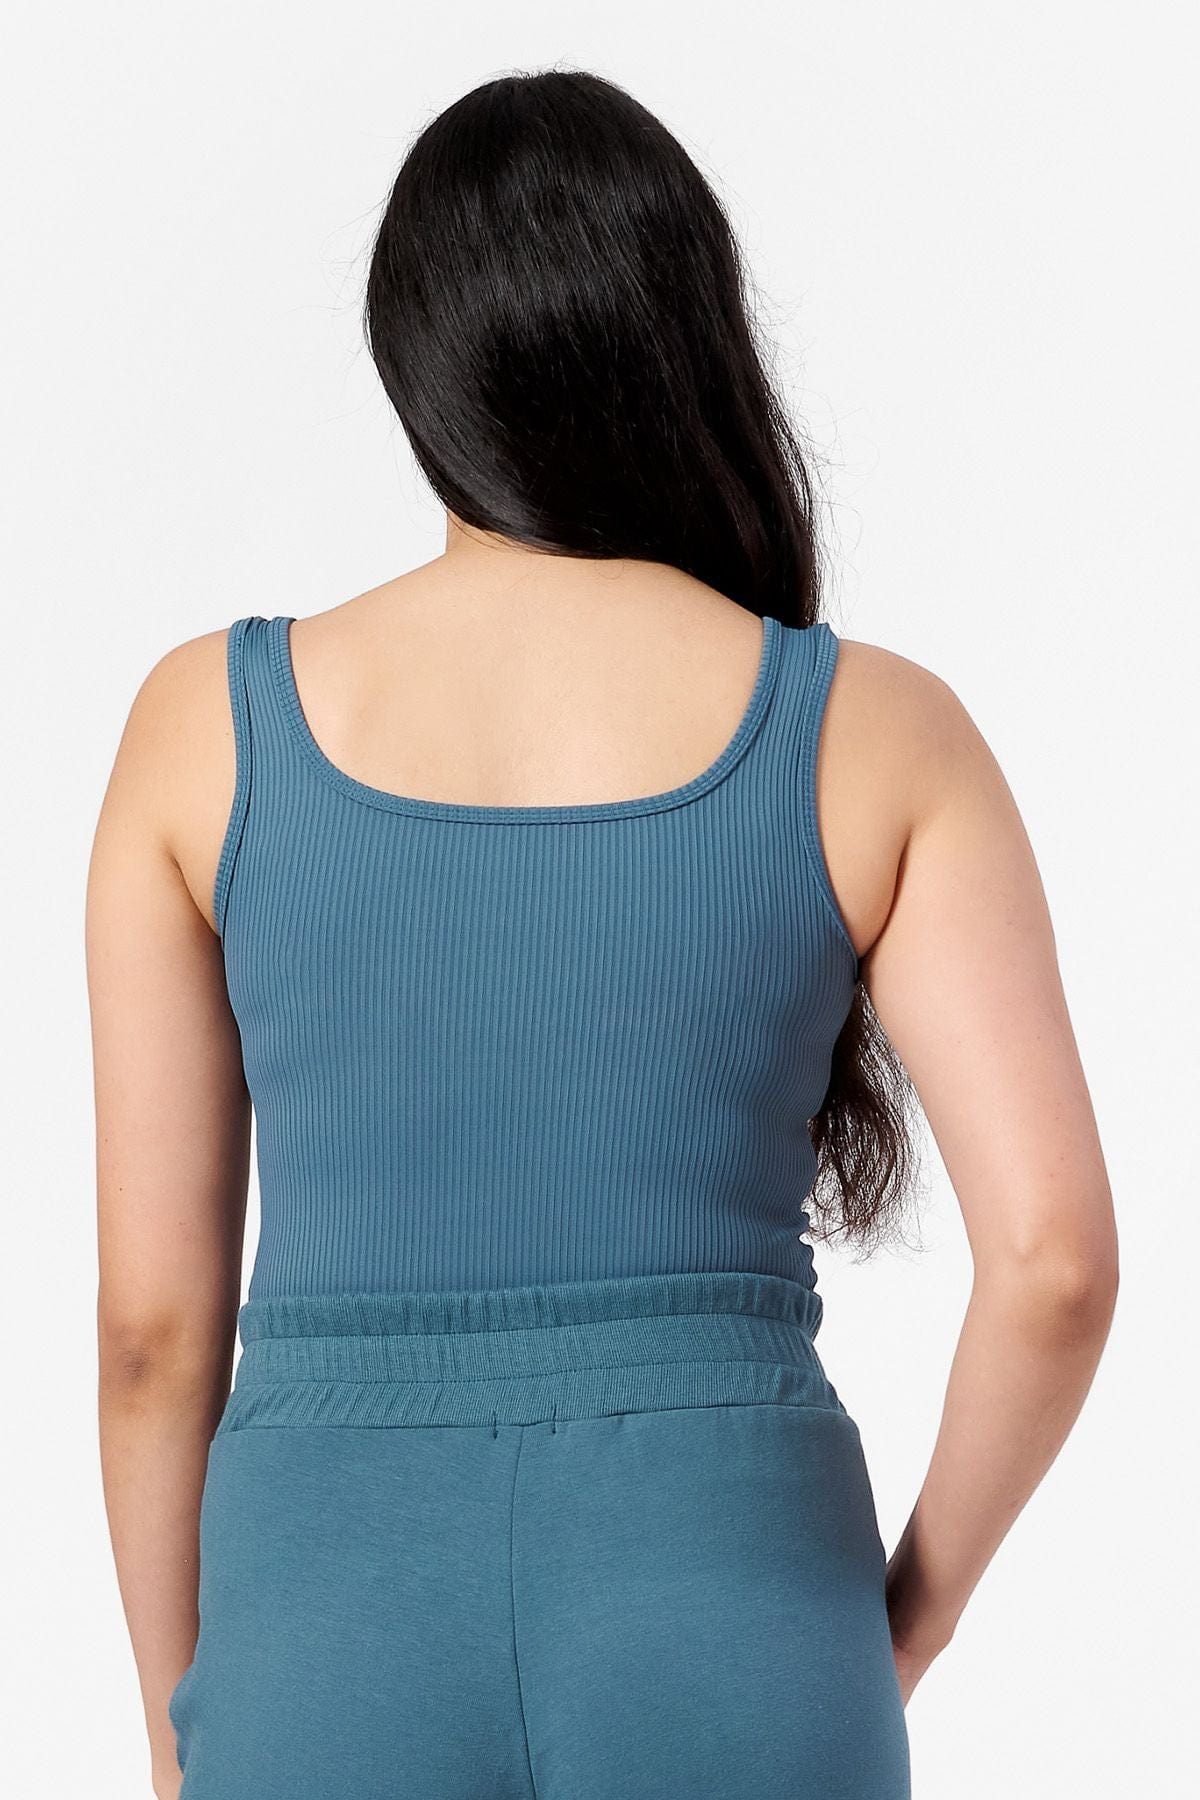 back view of woman wearing a square neck tank top in  a teal ribbed fabric.